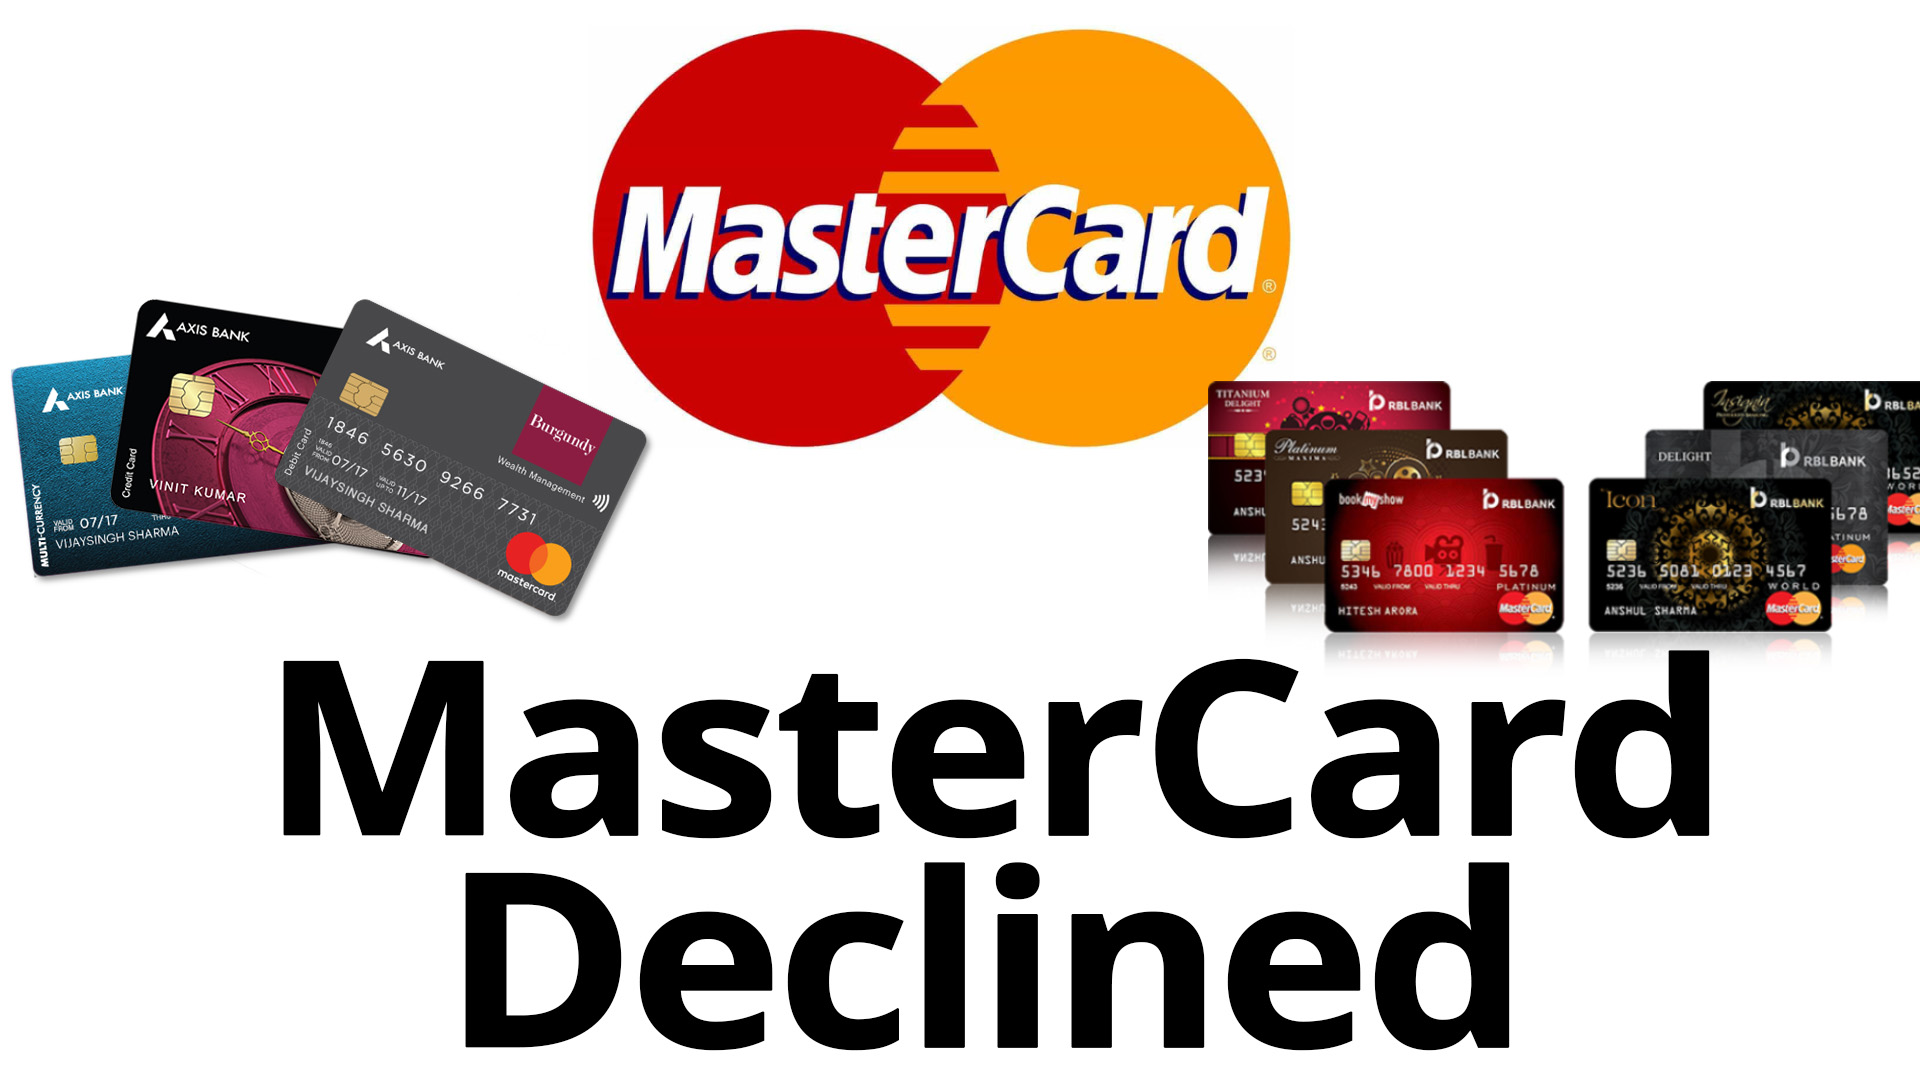 What the RBI ban on Mastercard means for the future